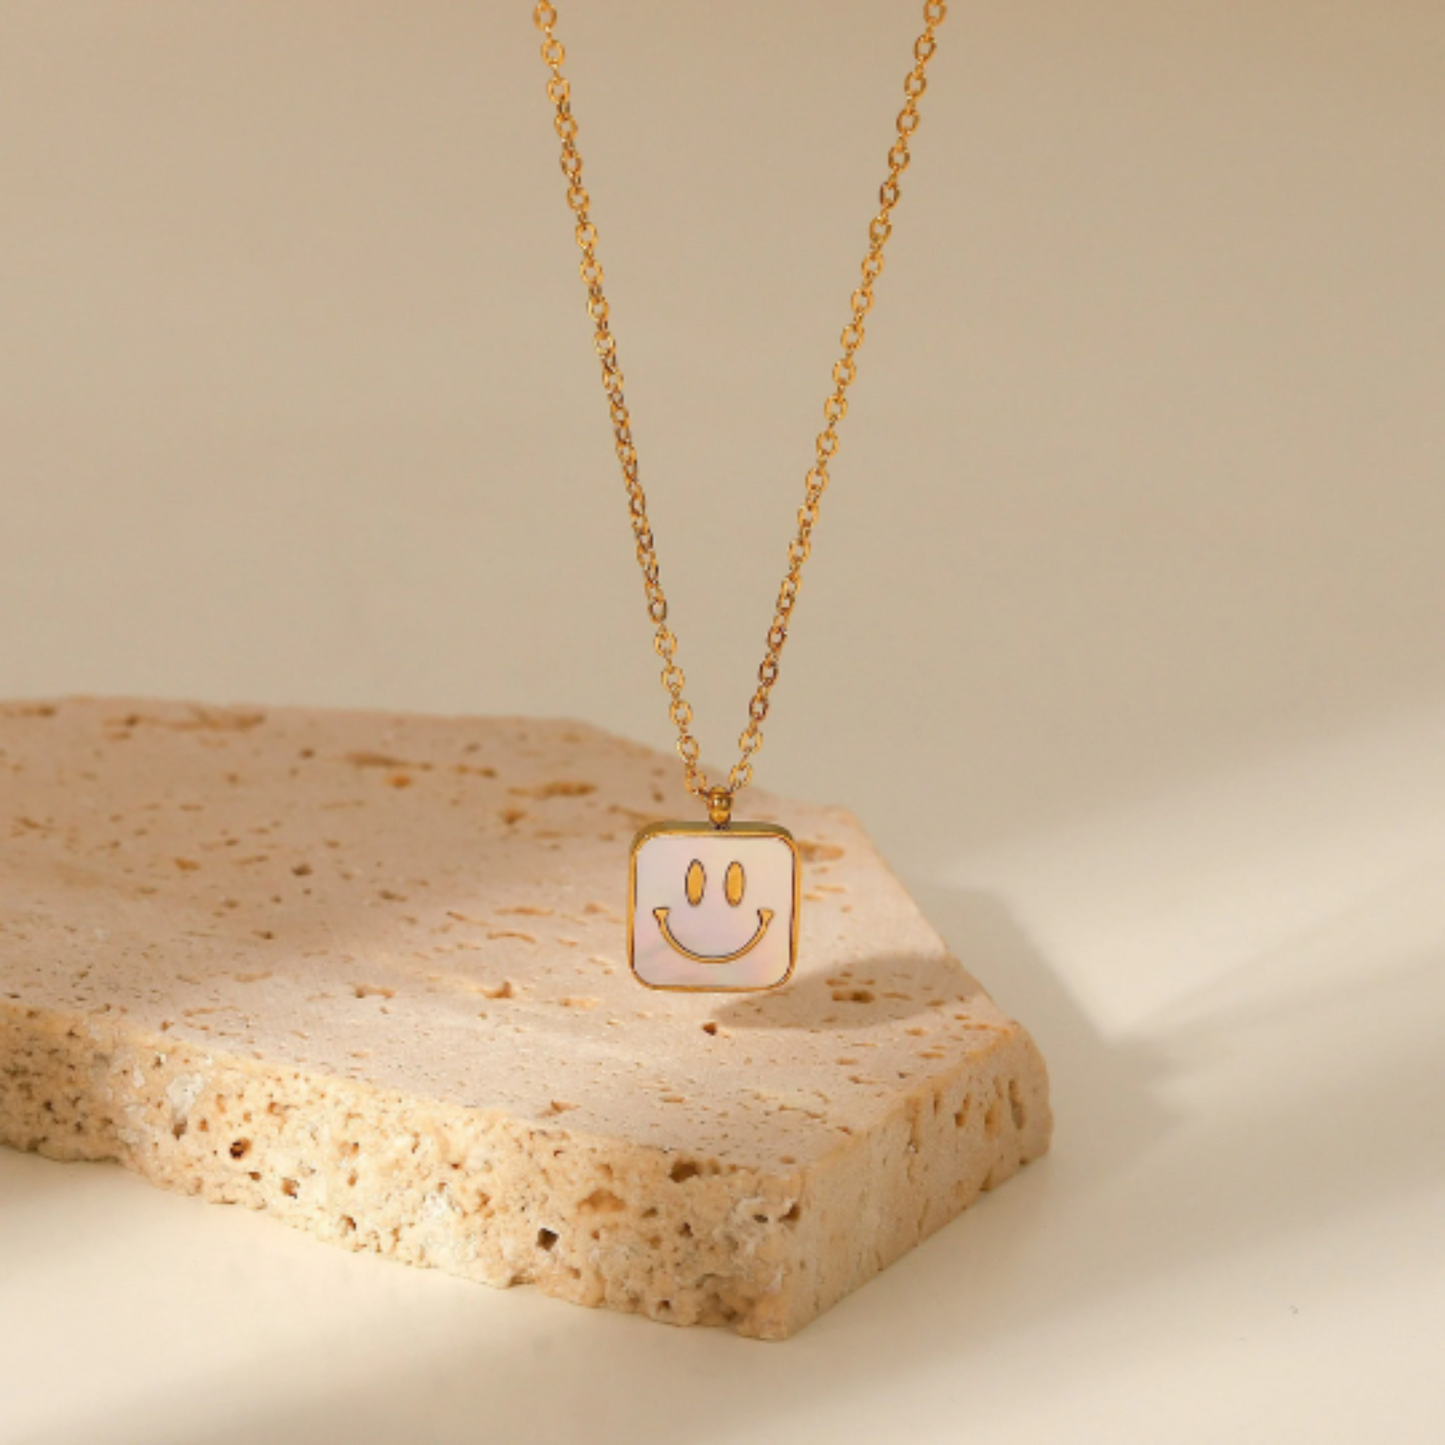 Gold Smile Face Pendant Necklace for Women